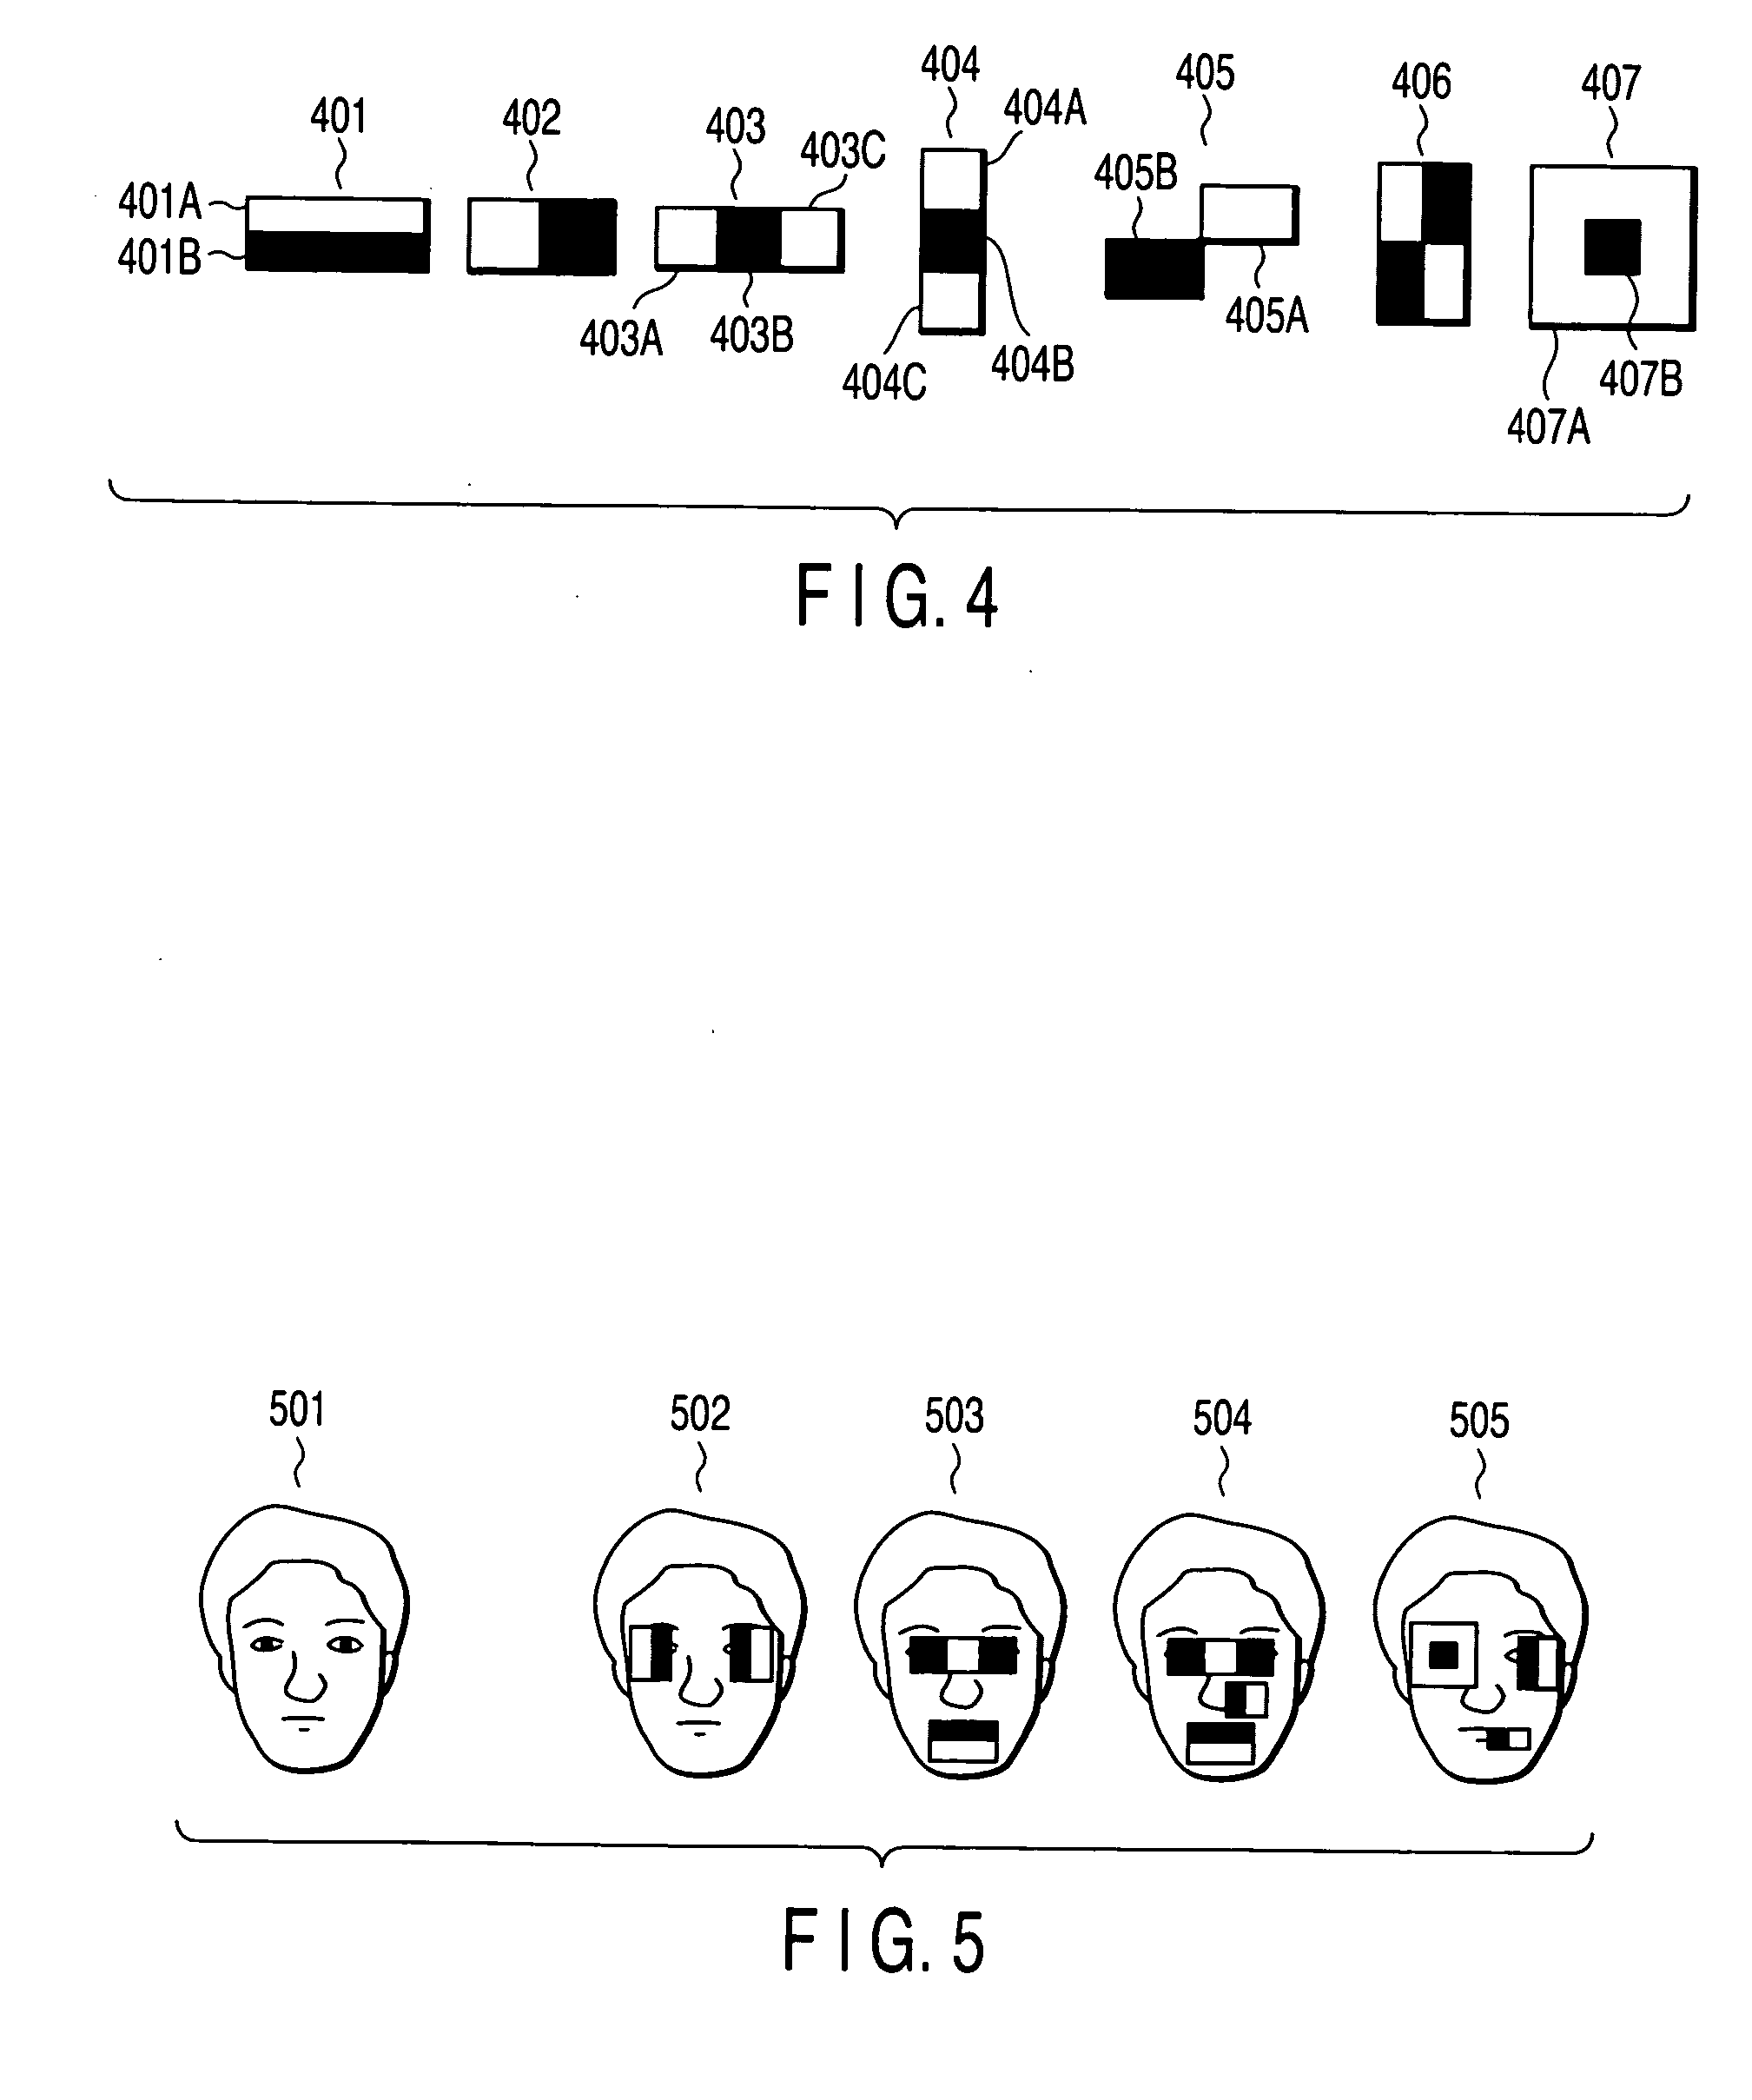 Object detection apparatus, learning apparatus, object detection system, object detection method and object detection program